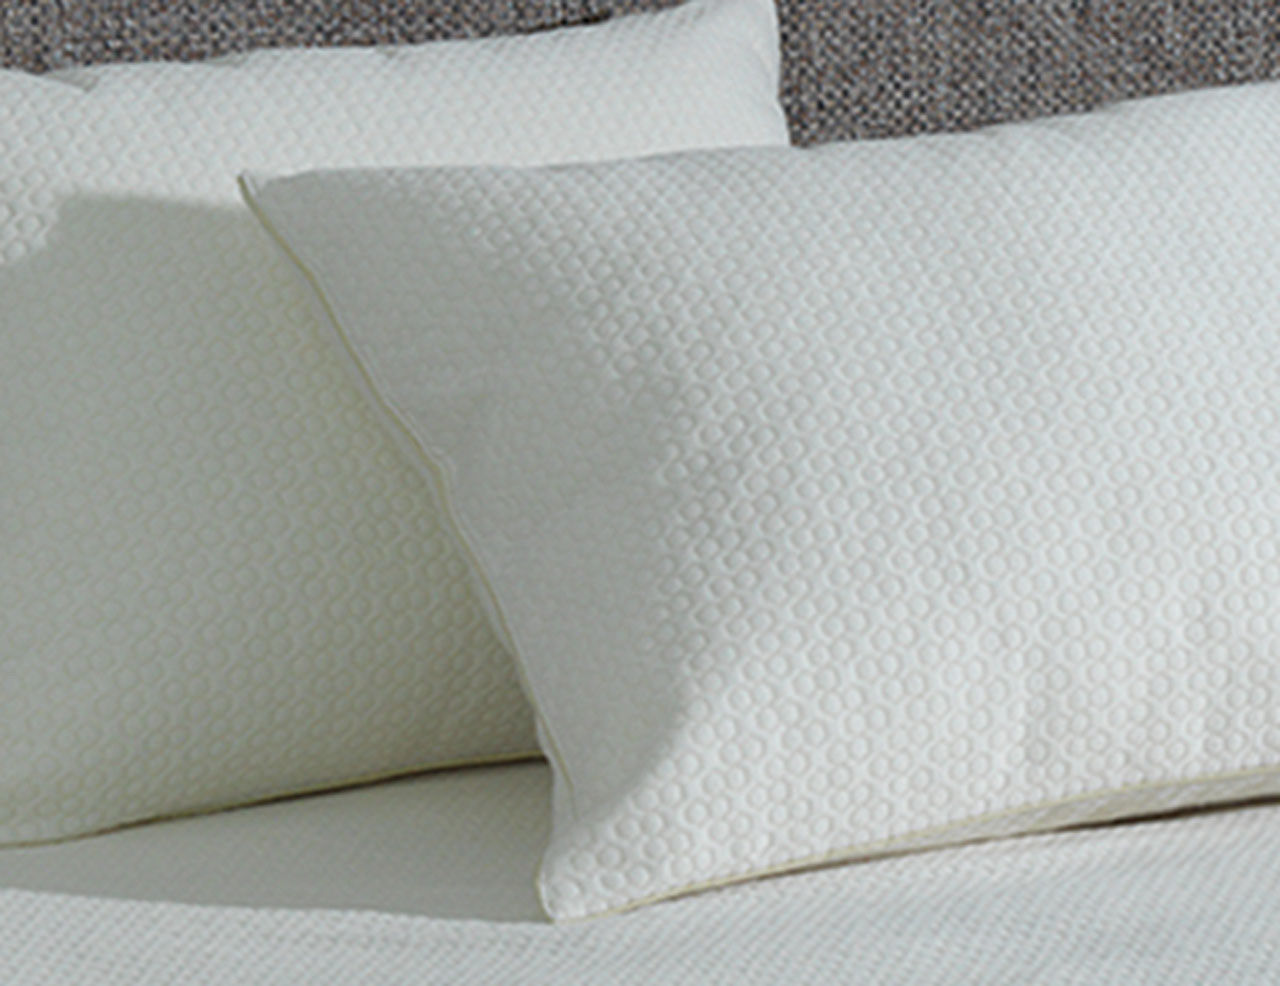 What sets AllerEase Professional Pillows Platinum Style apart from other hotel pillows?